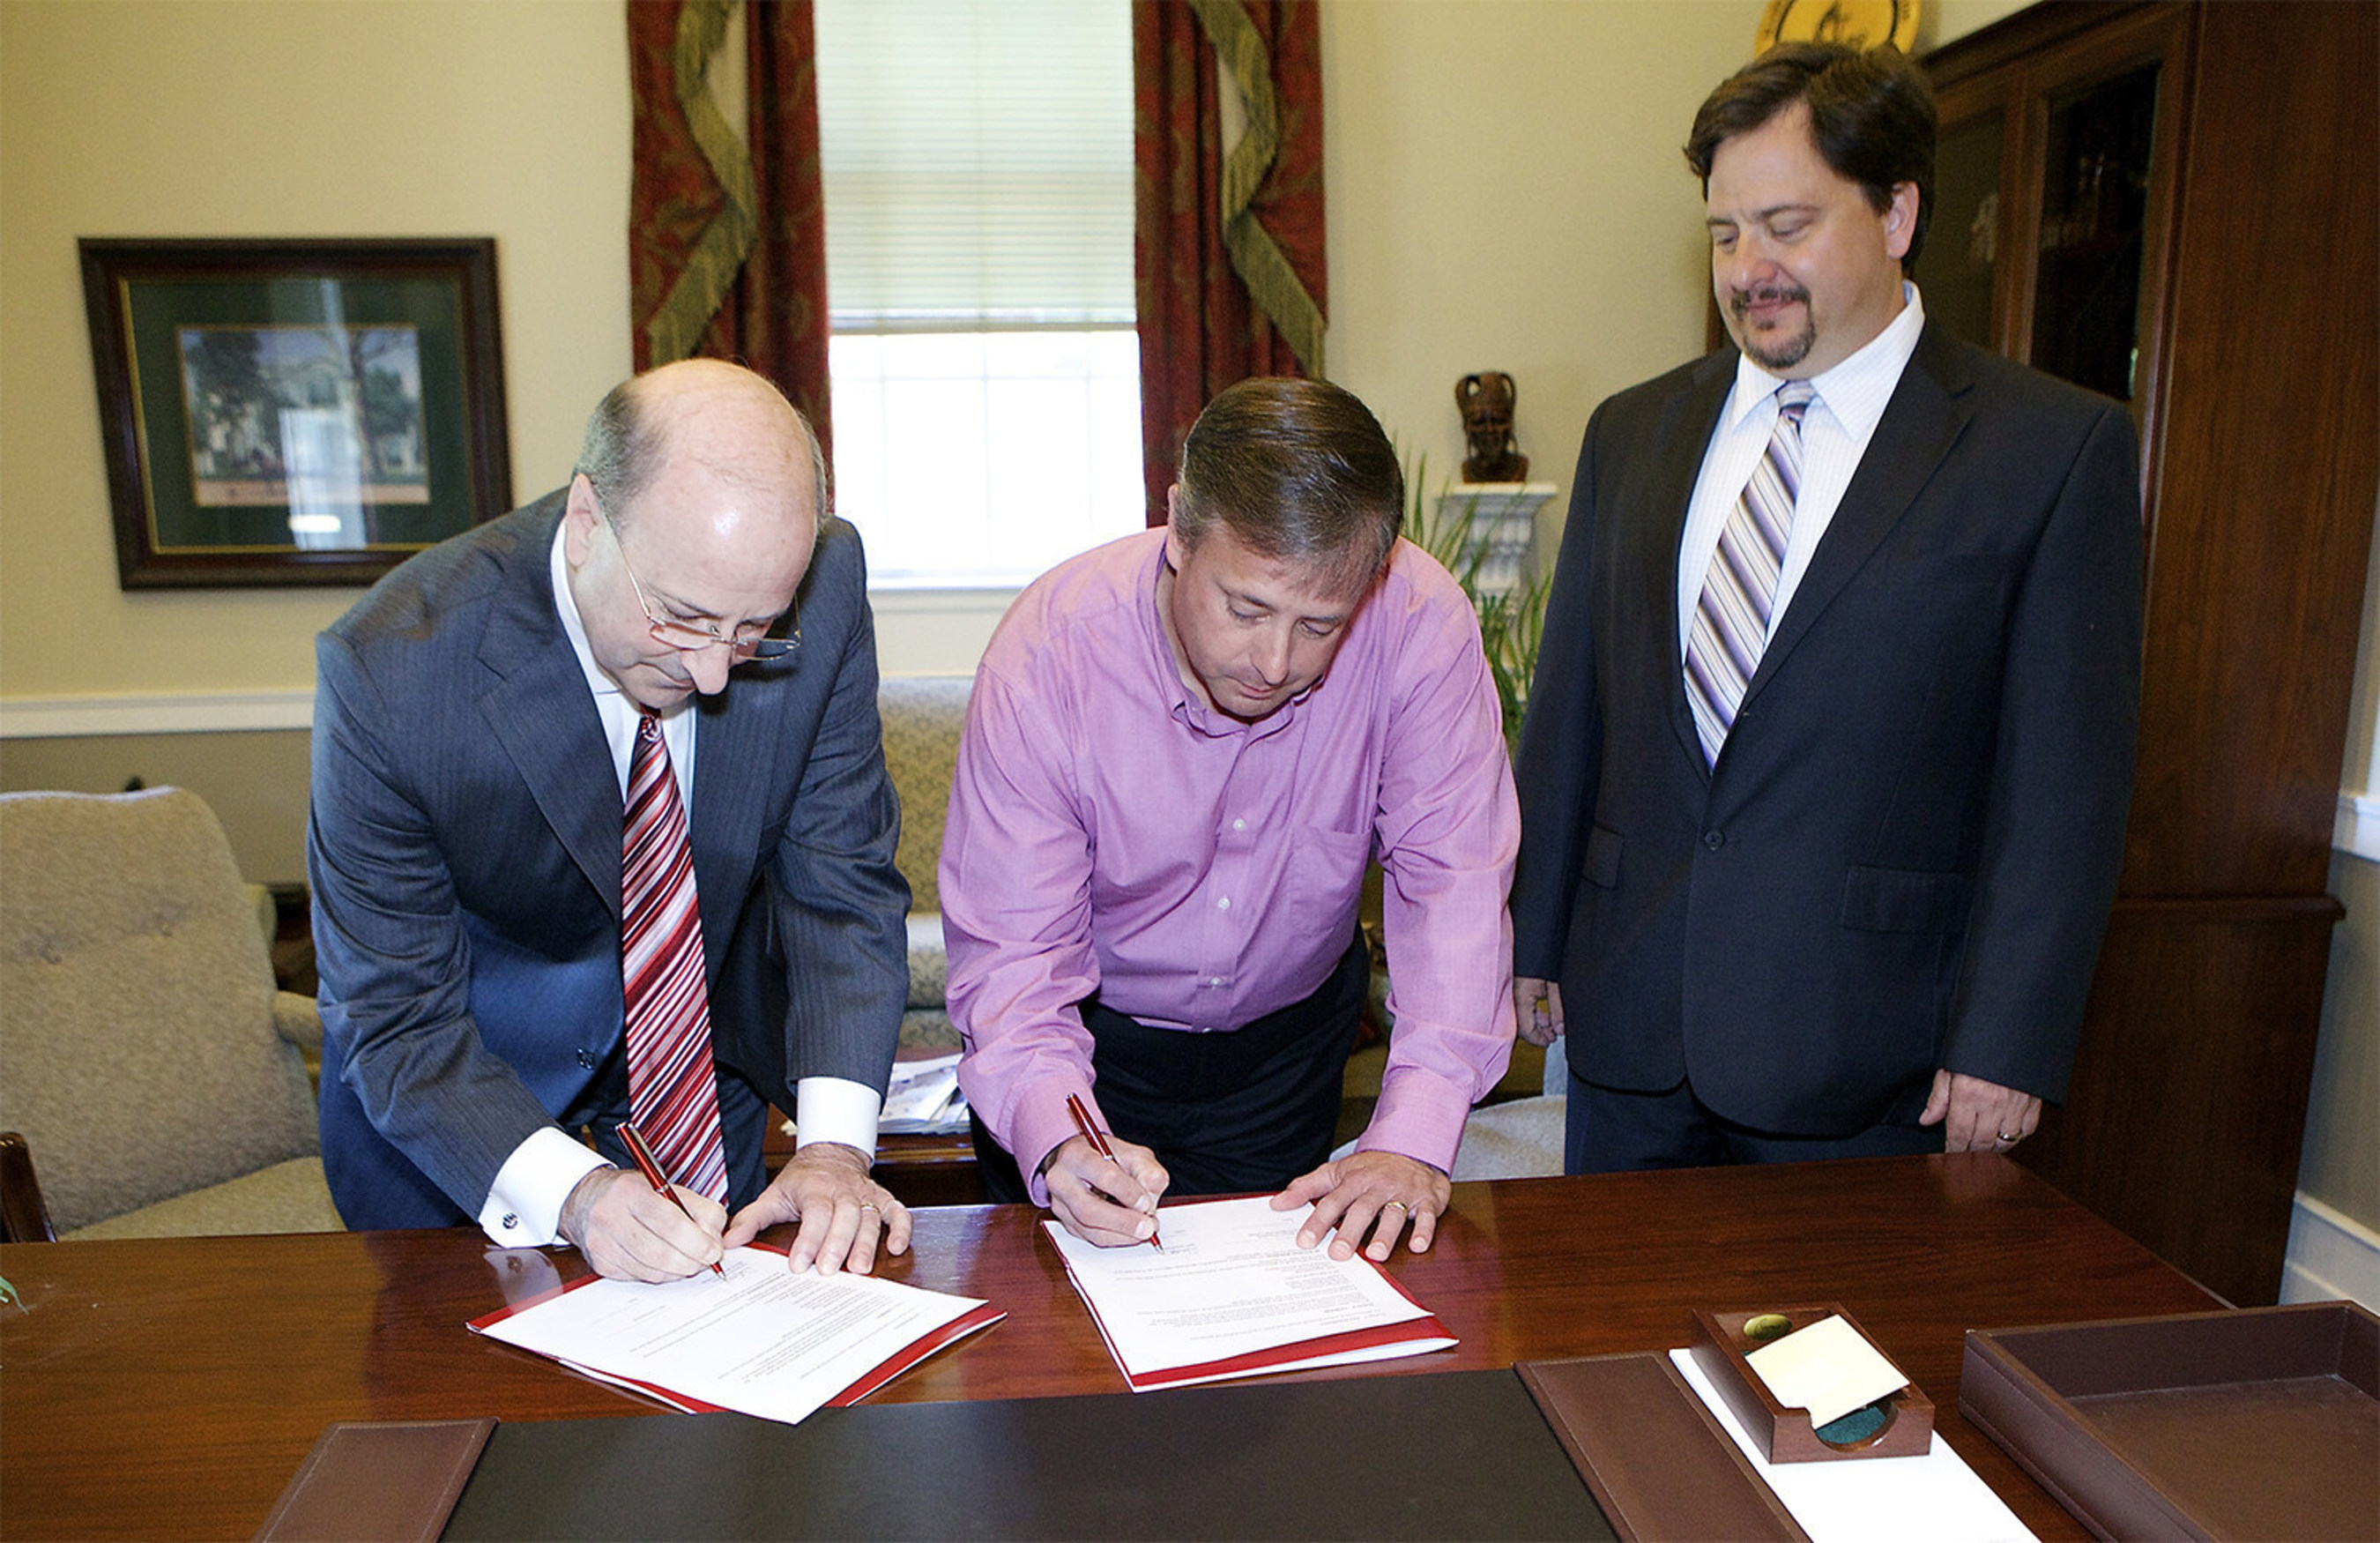 Troy Baxter (center), human resources director for NPC International's east division, and Martin Methodist College President Ted Brown sign the partnership agreement for MMC to offer online business degree opportunities to the company's employees. Dr. William Sodeman, chairman of the college's Johnston School of Business, looks on.